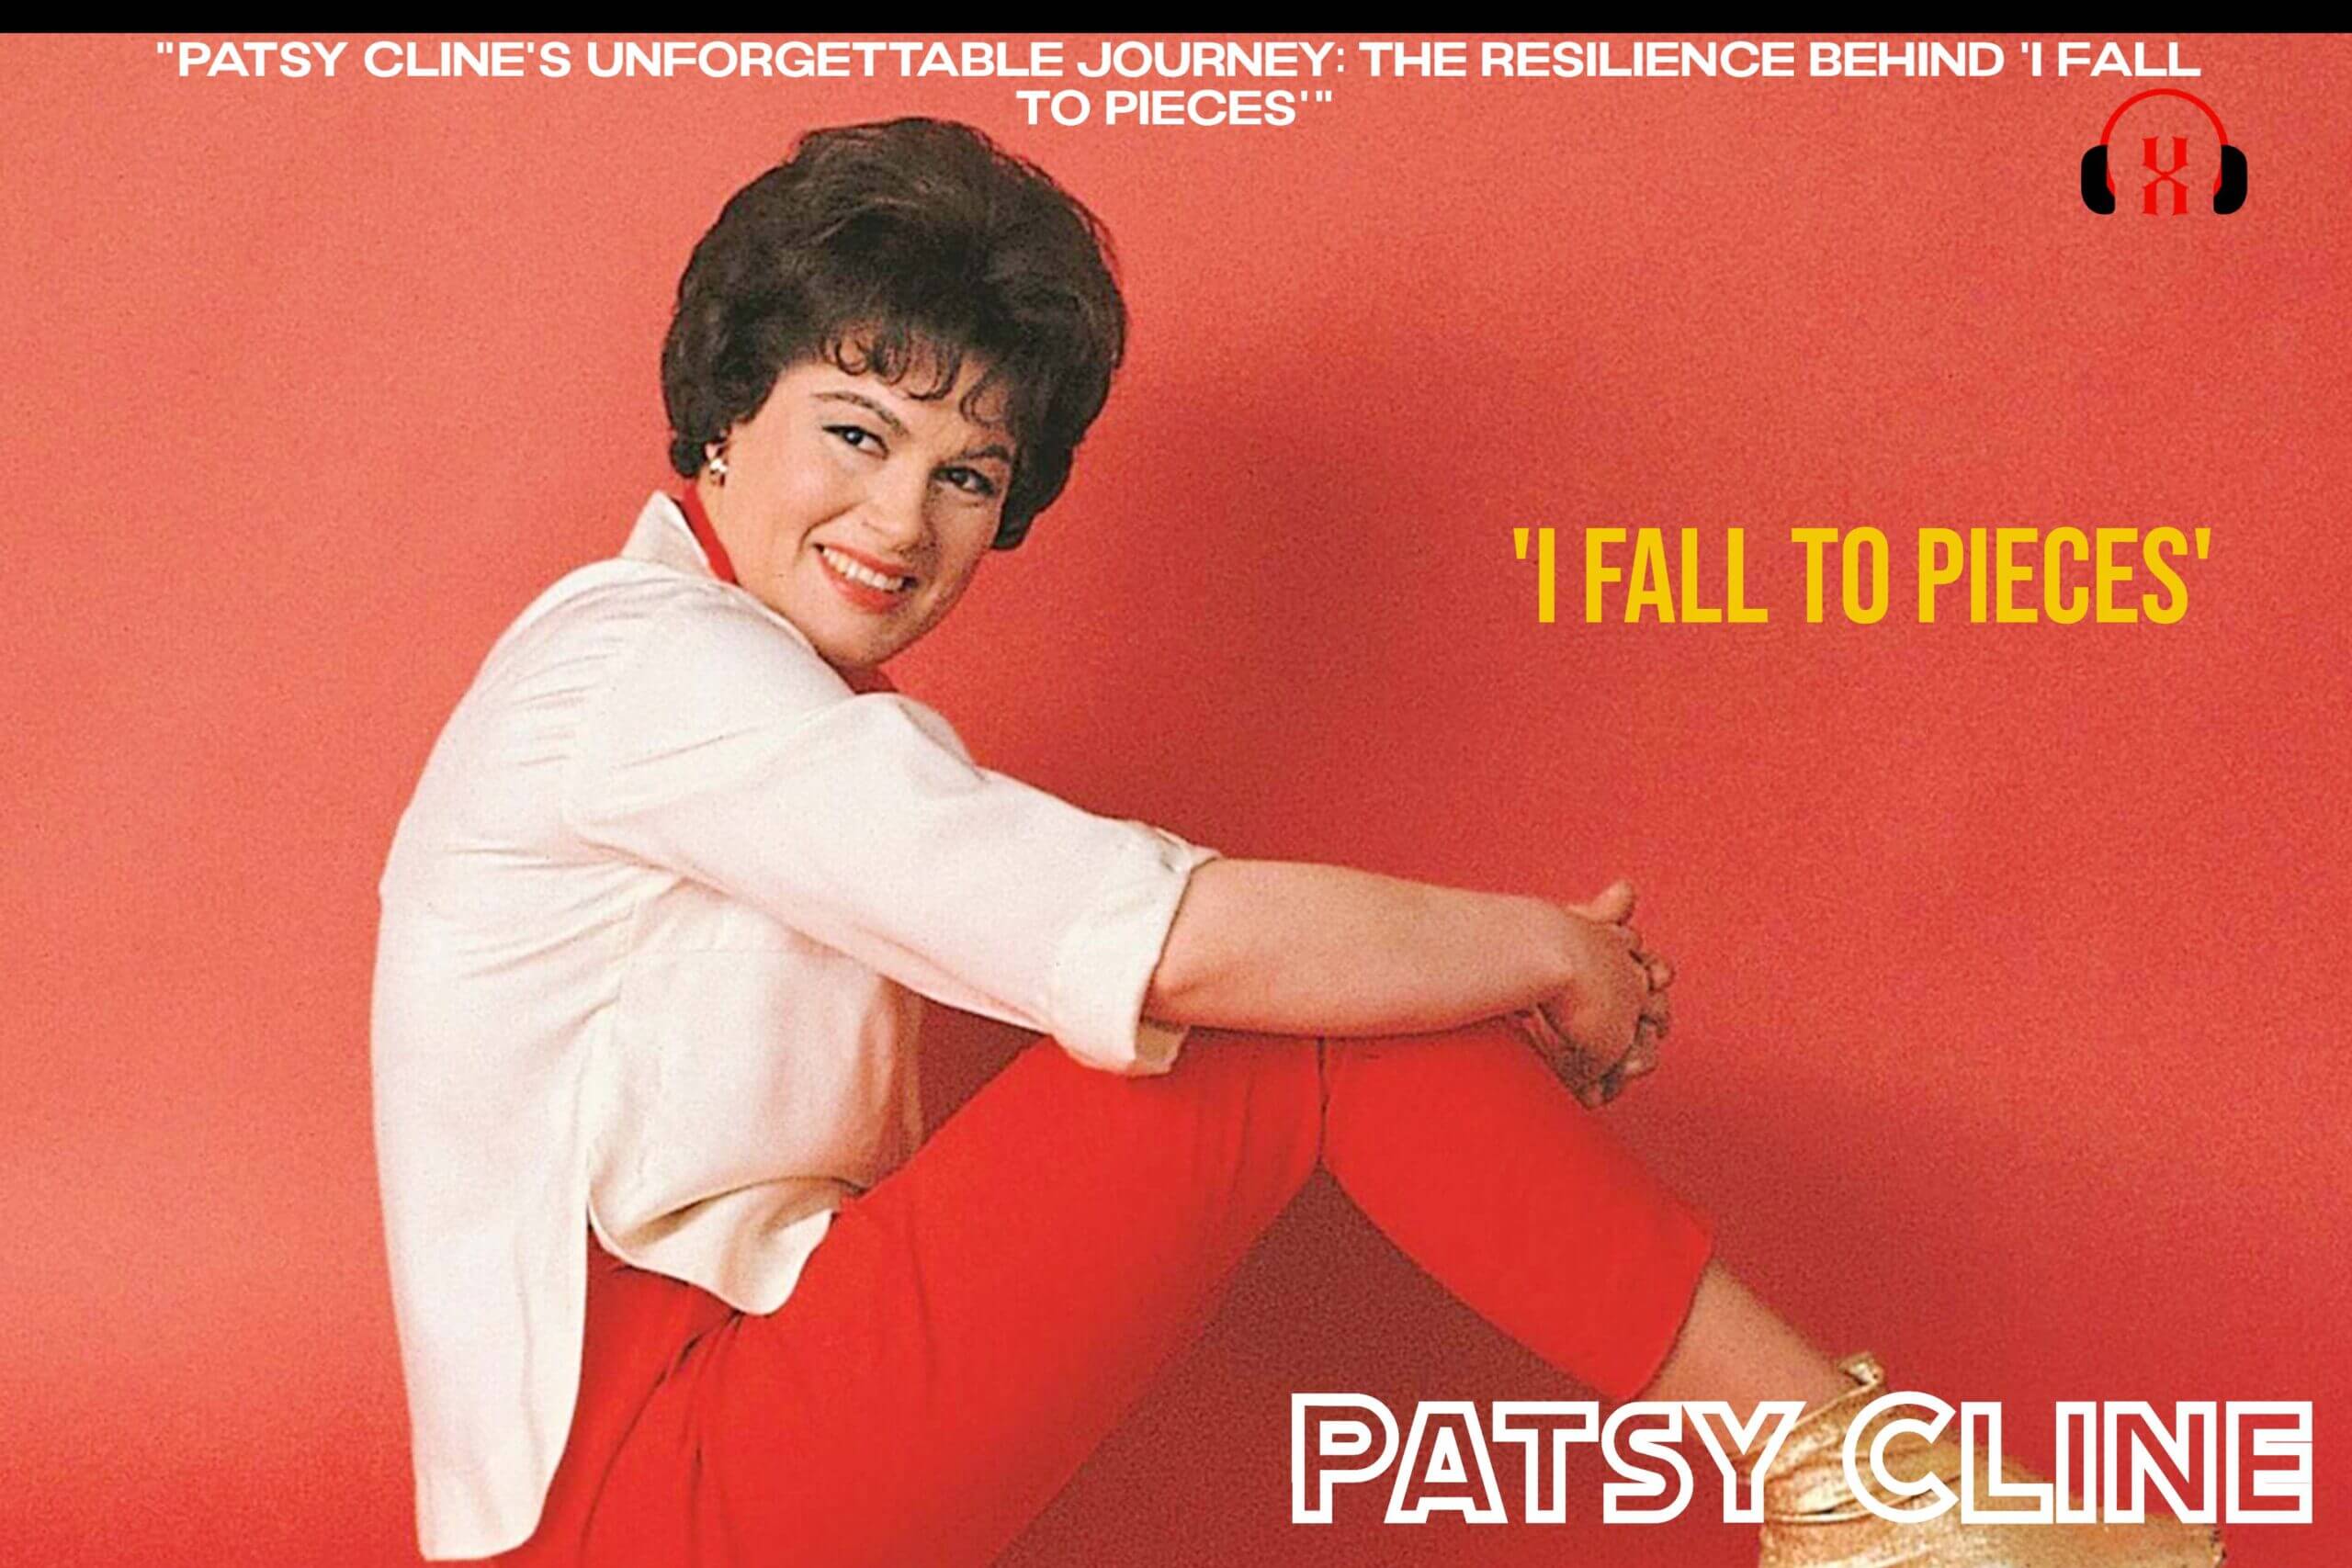 “Patsy Cline’s Unforgettable Journey: The Resilience Behind ‘I Fall To Pieces'”